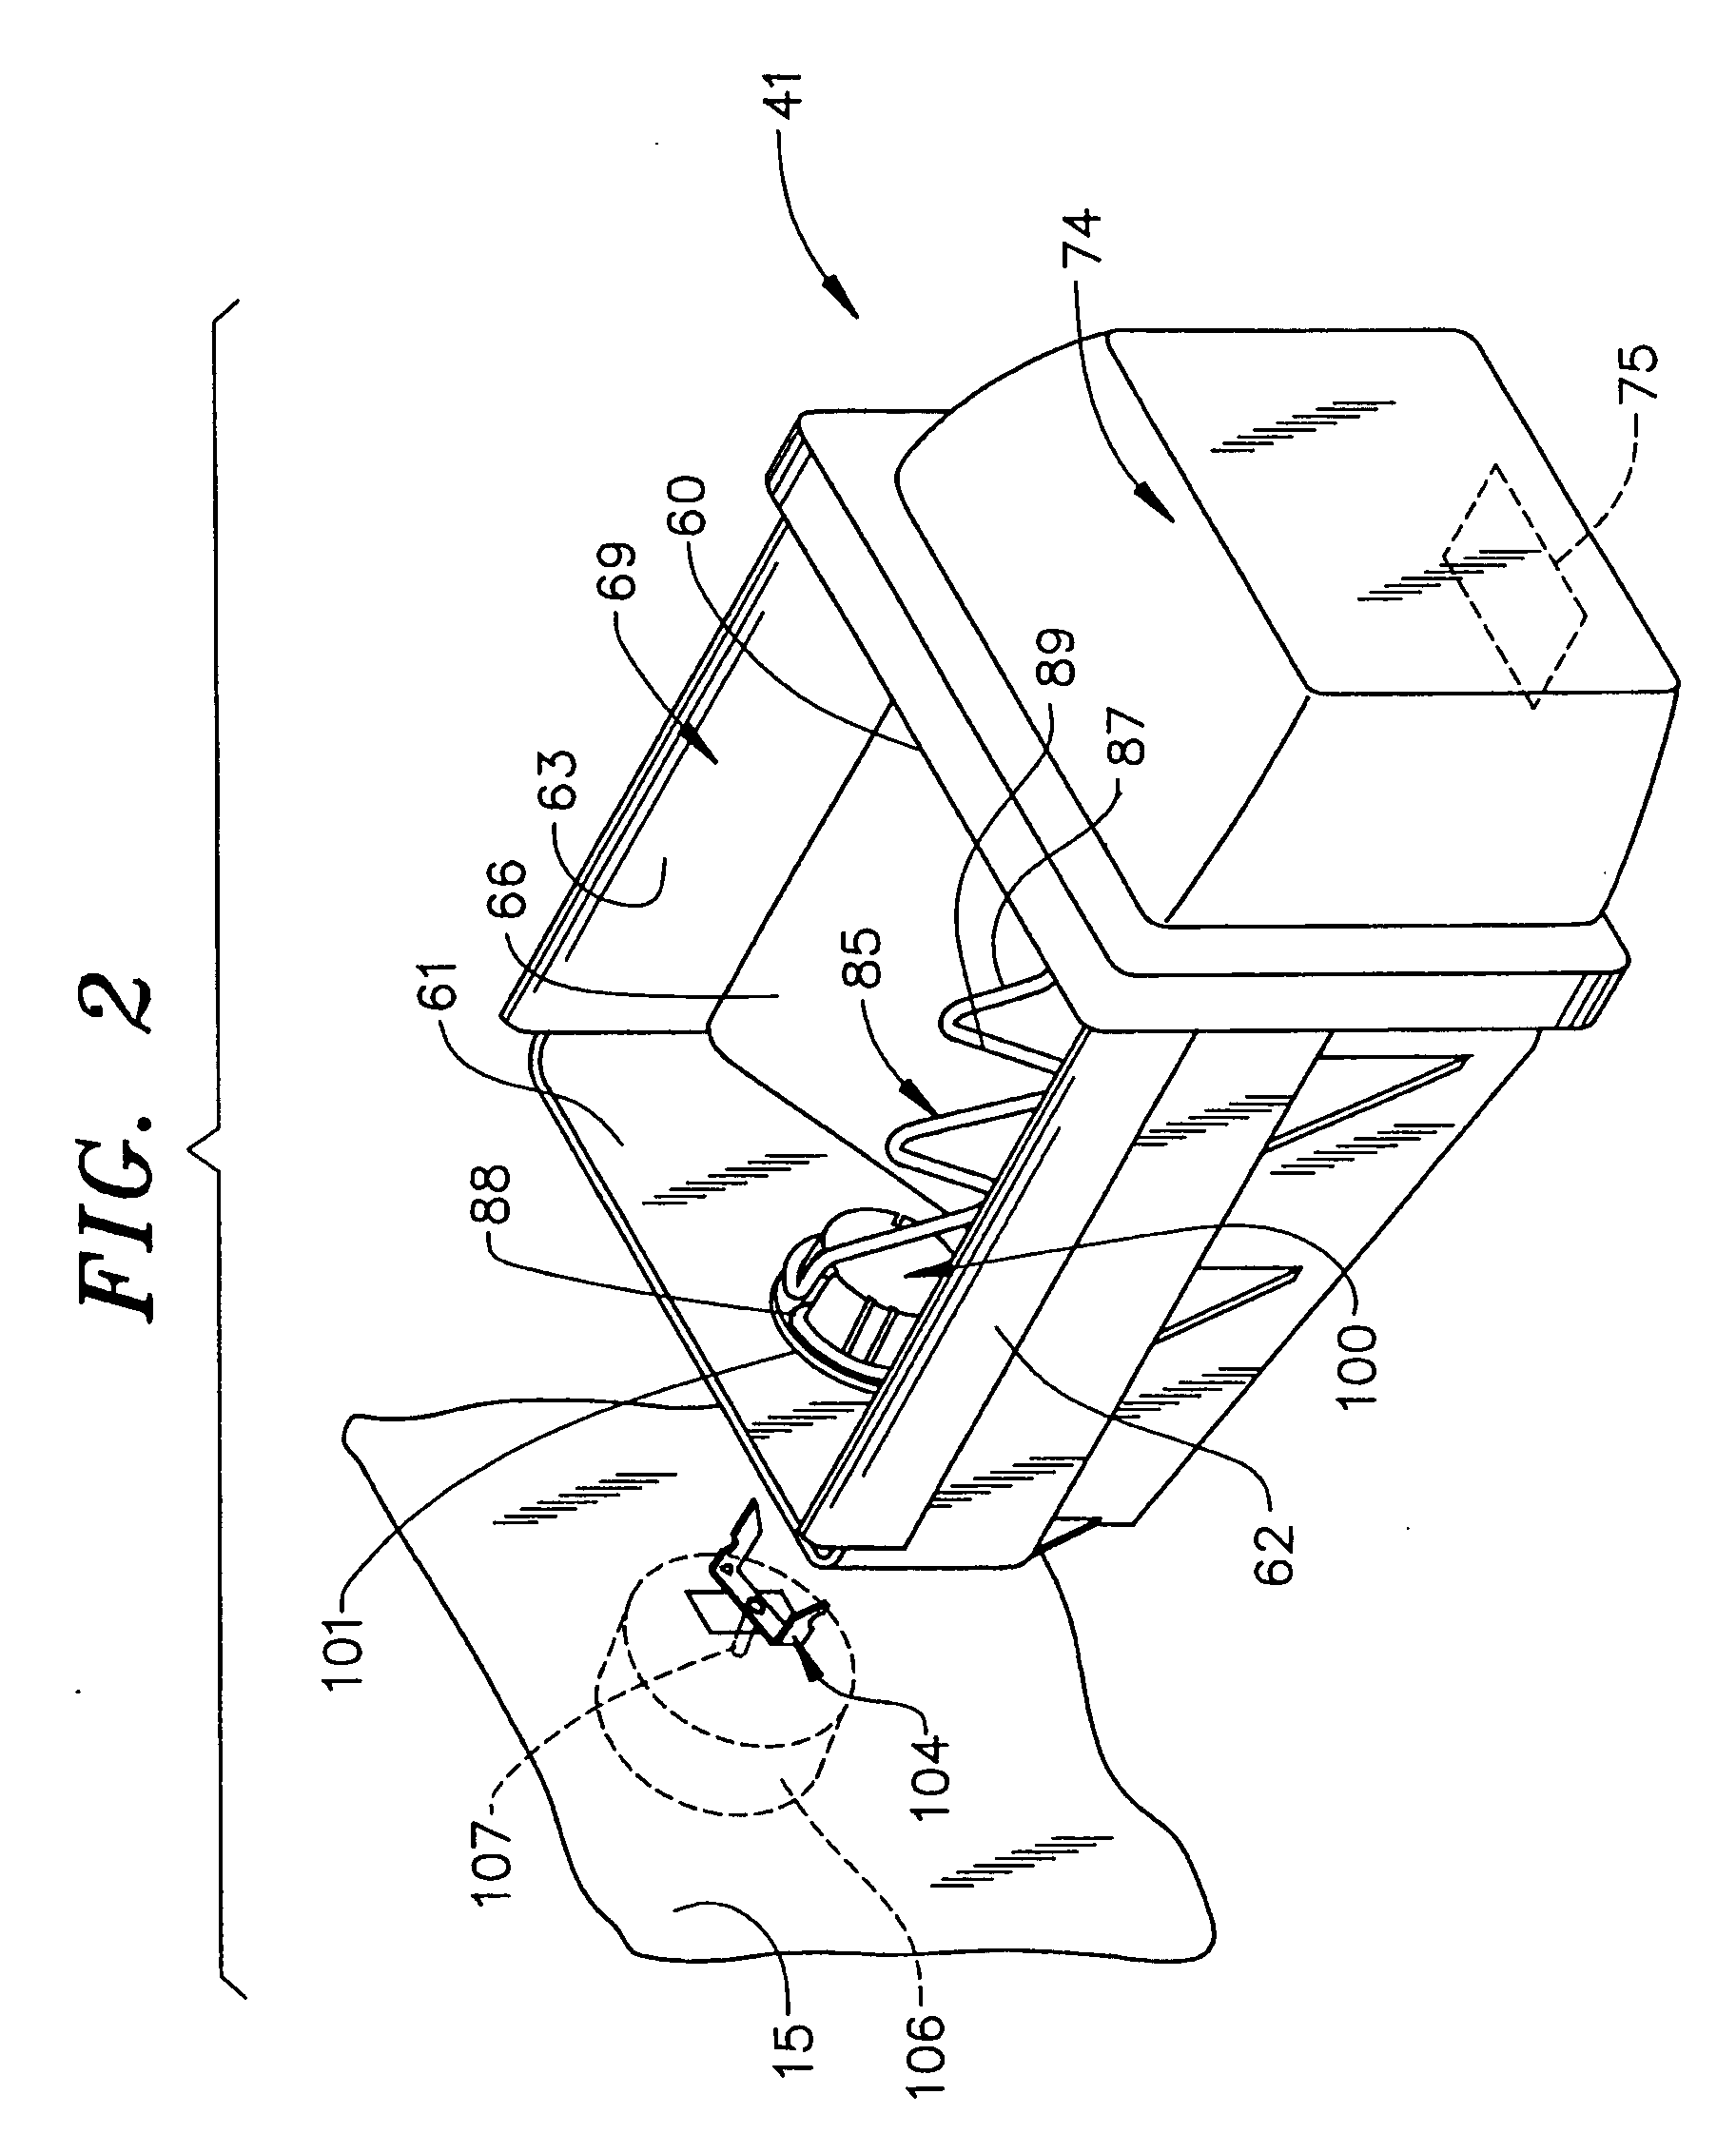 Icemaker assembly for a refrigerator